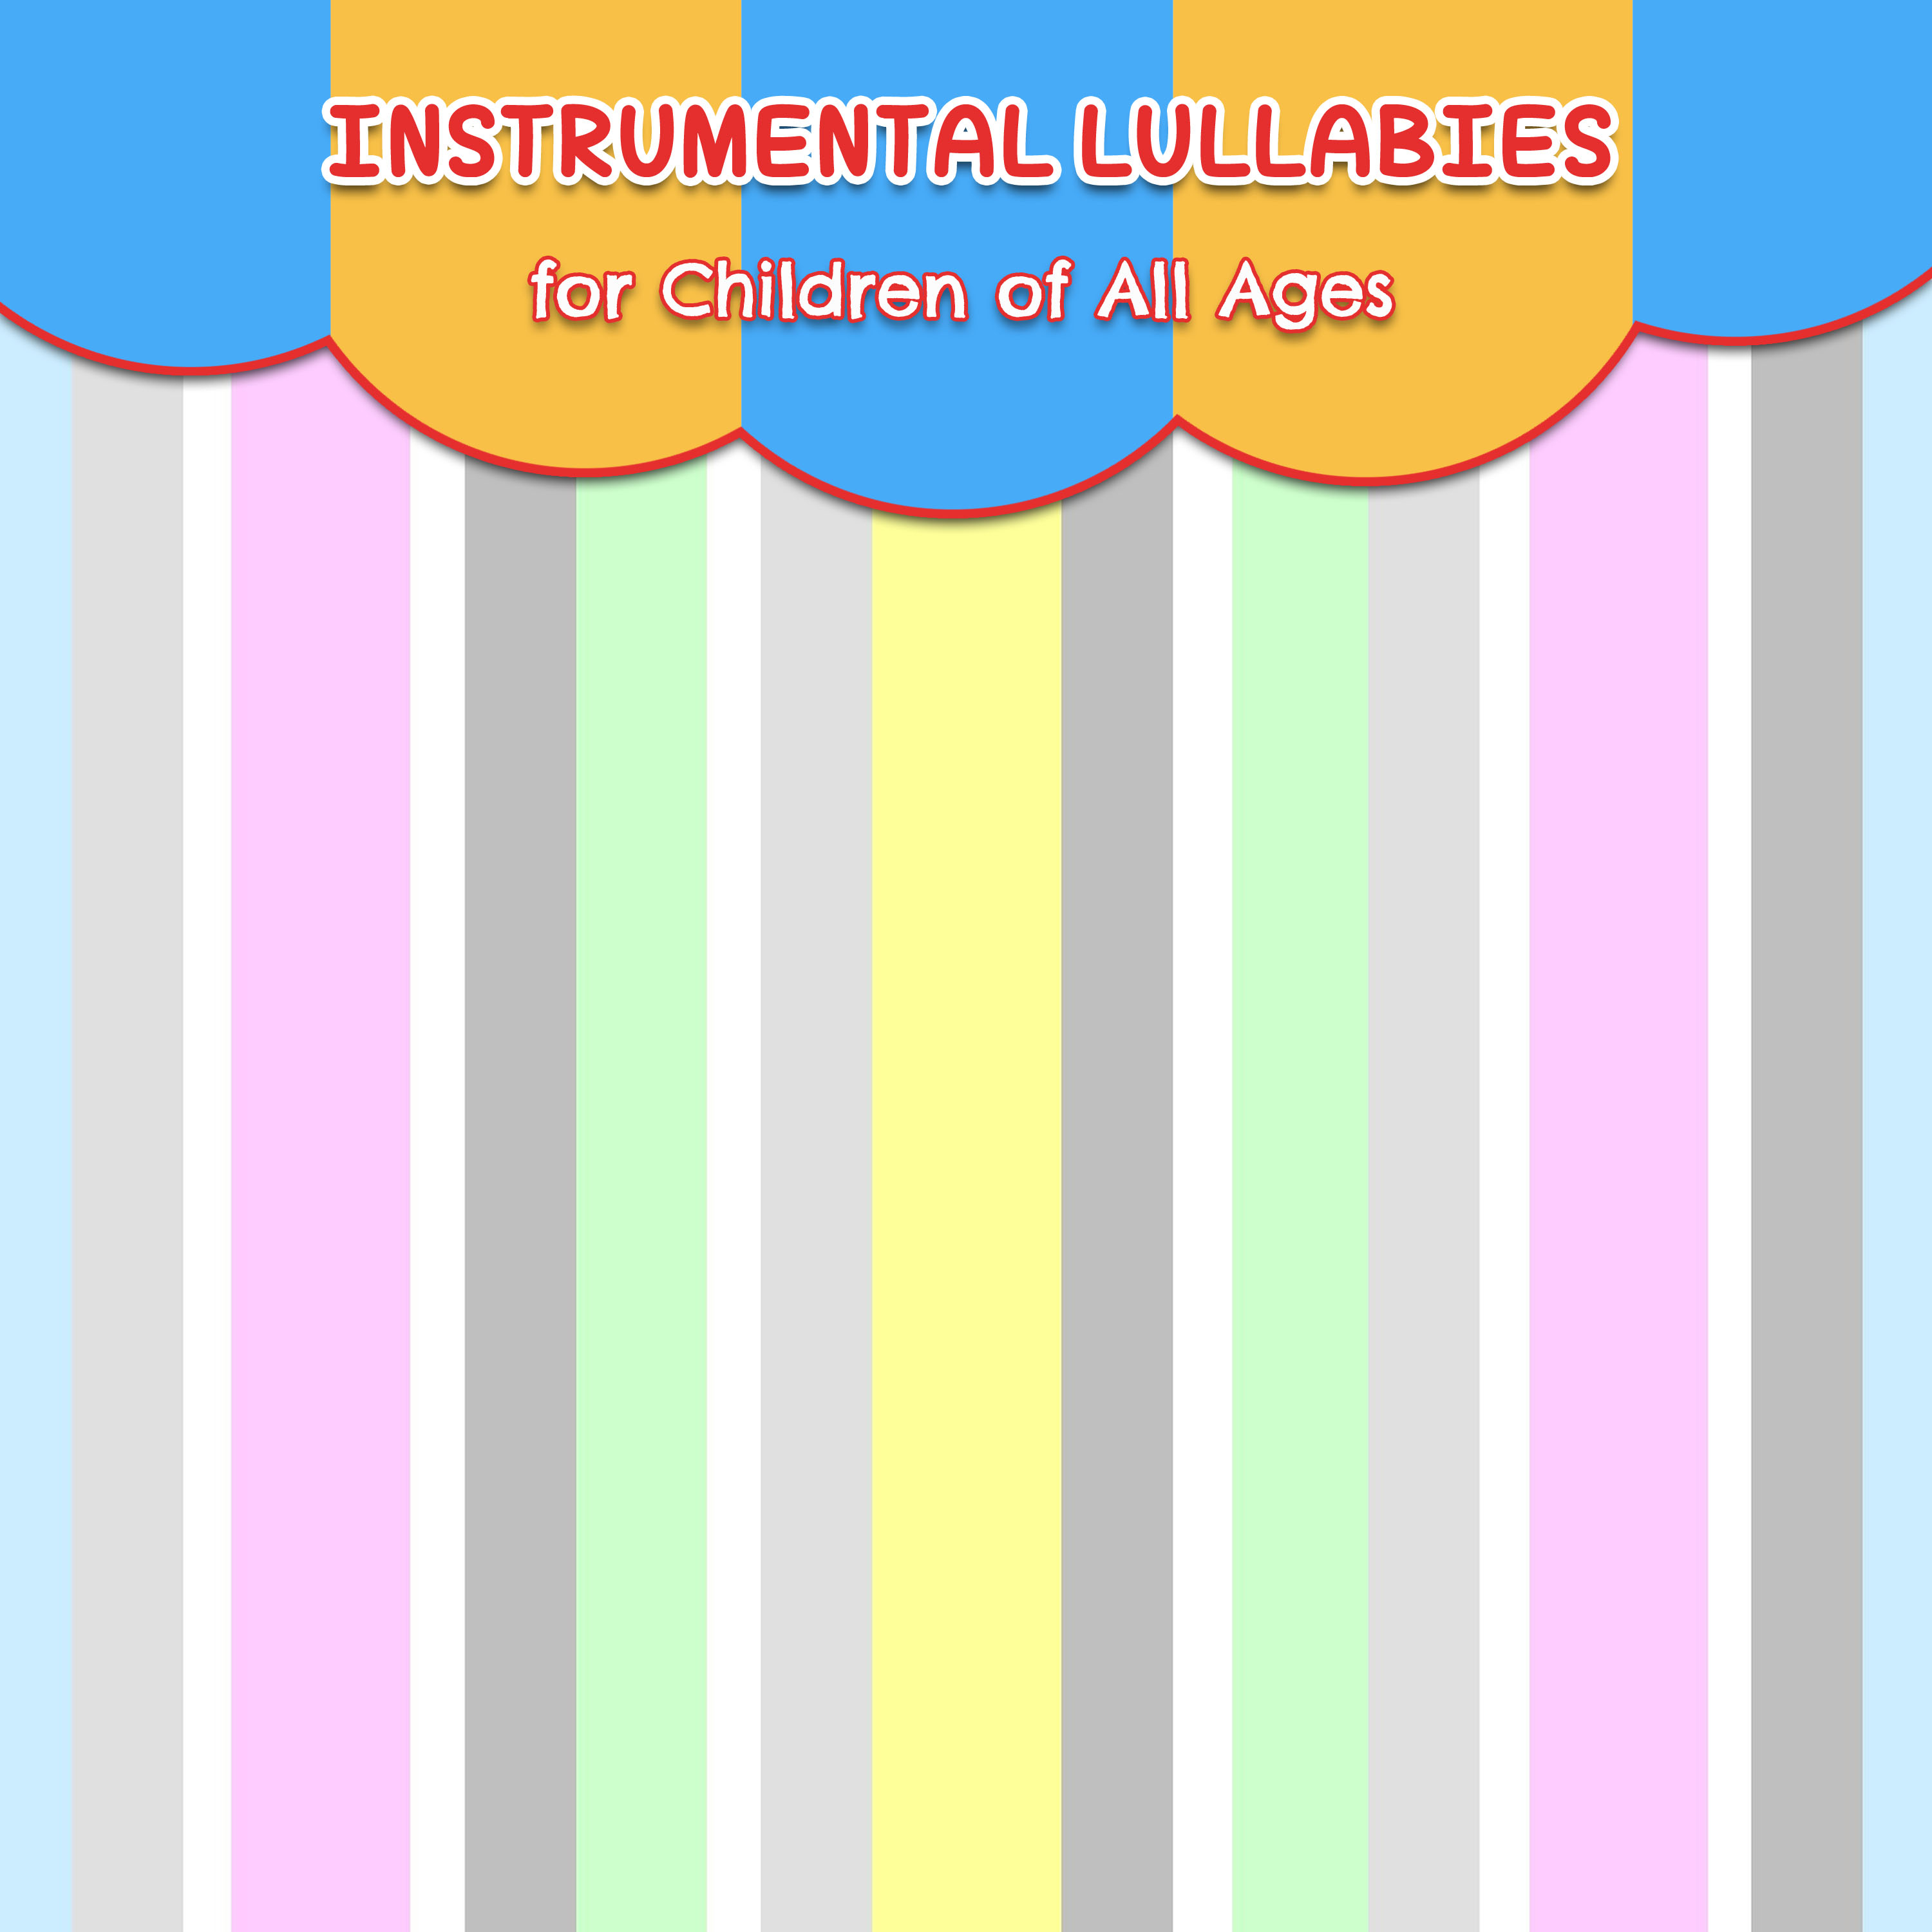 16 Instrumental Lullabies for Children of All Ages